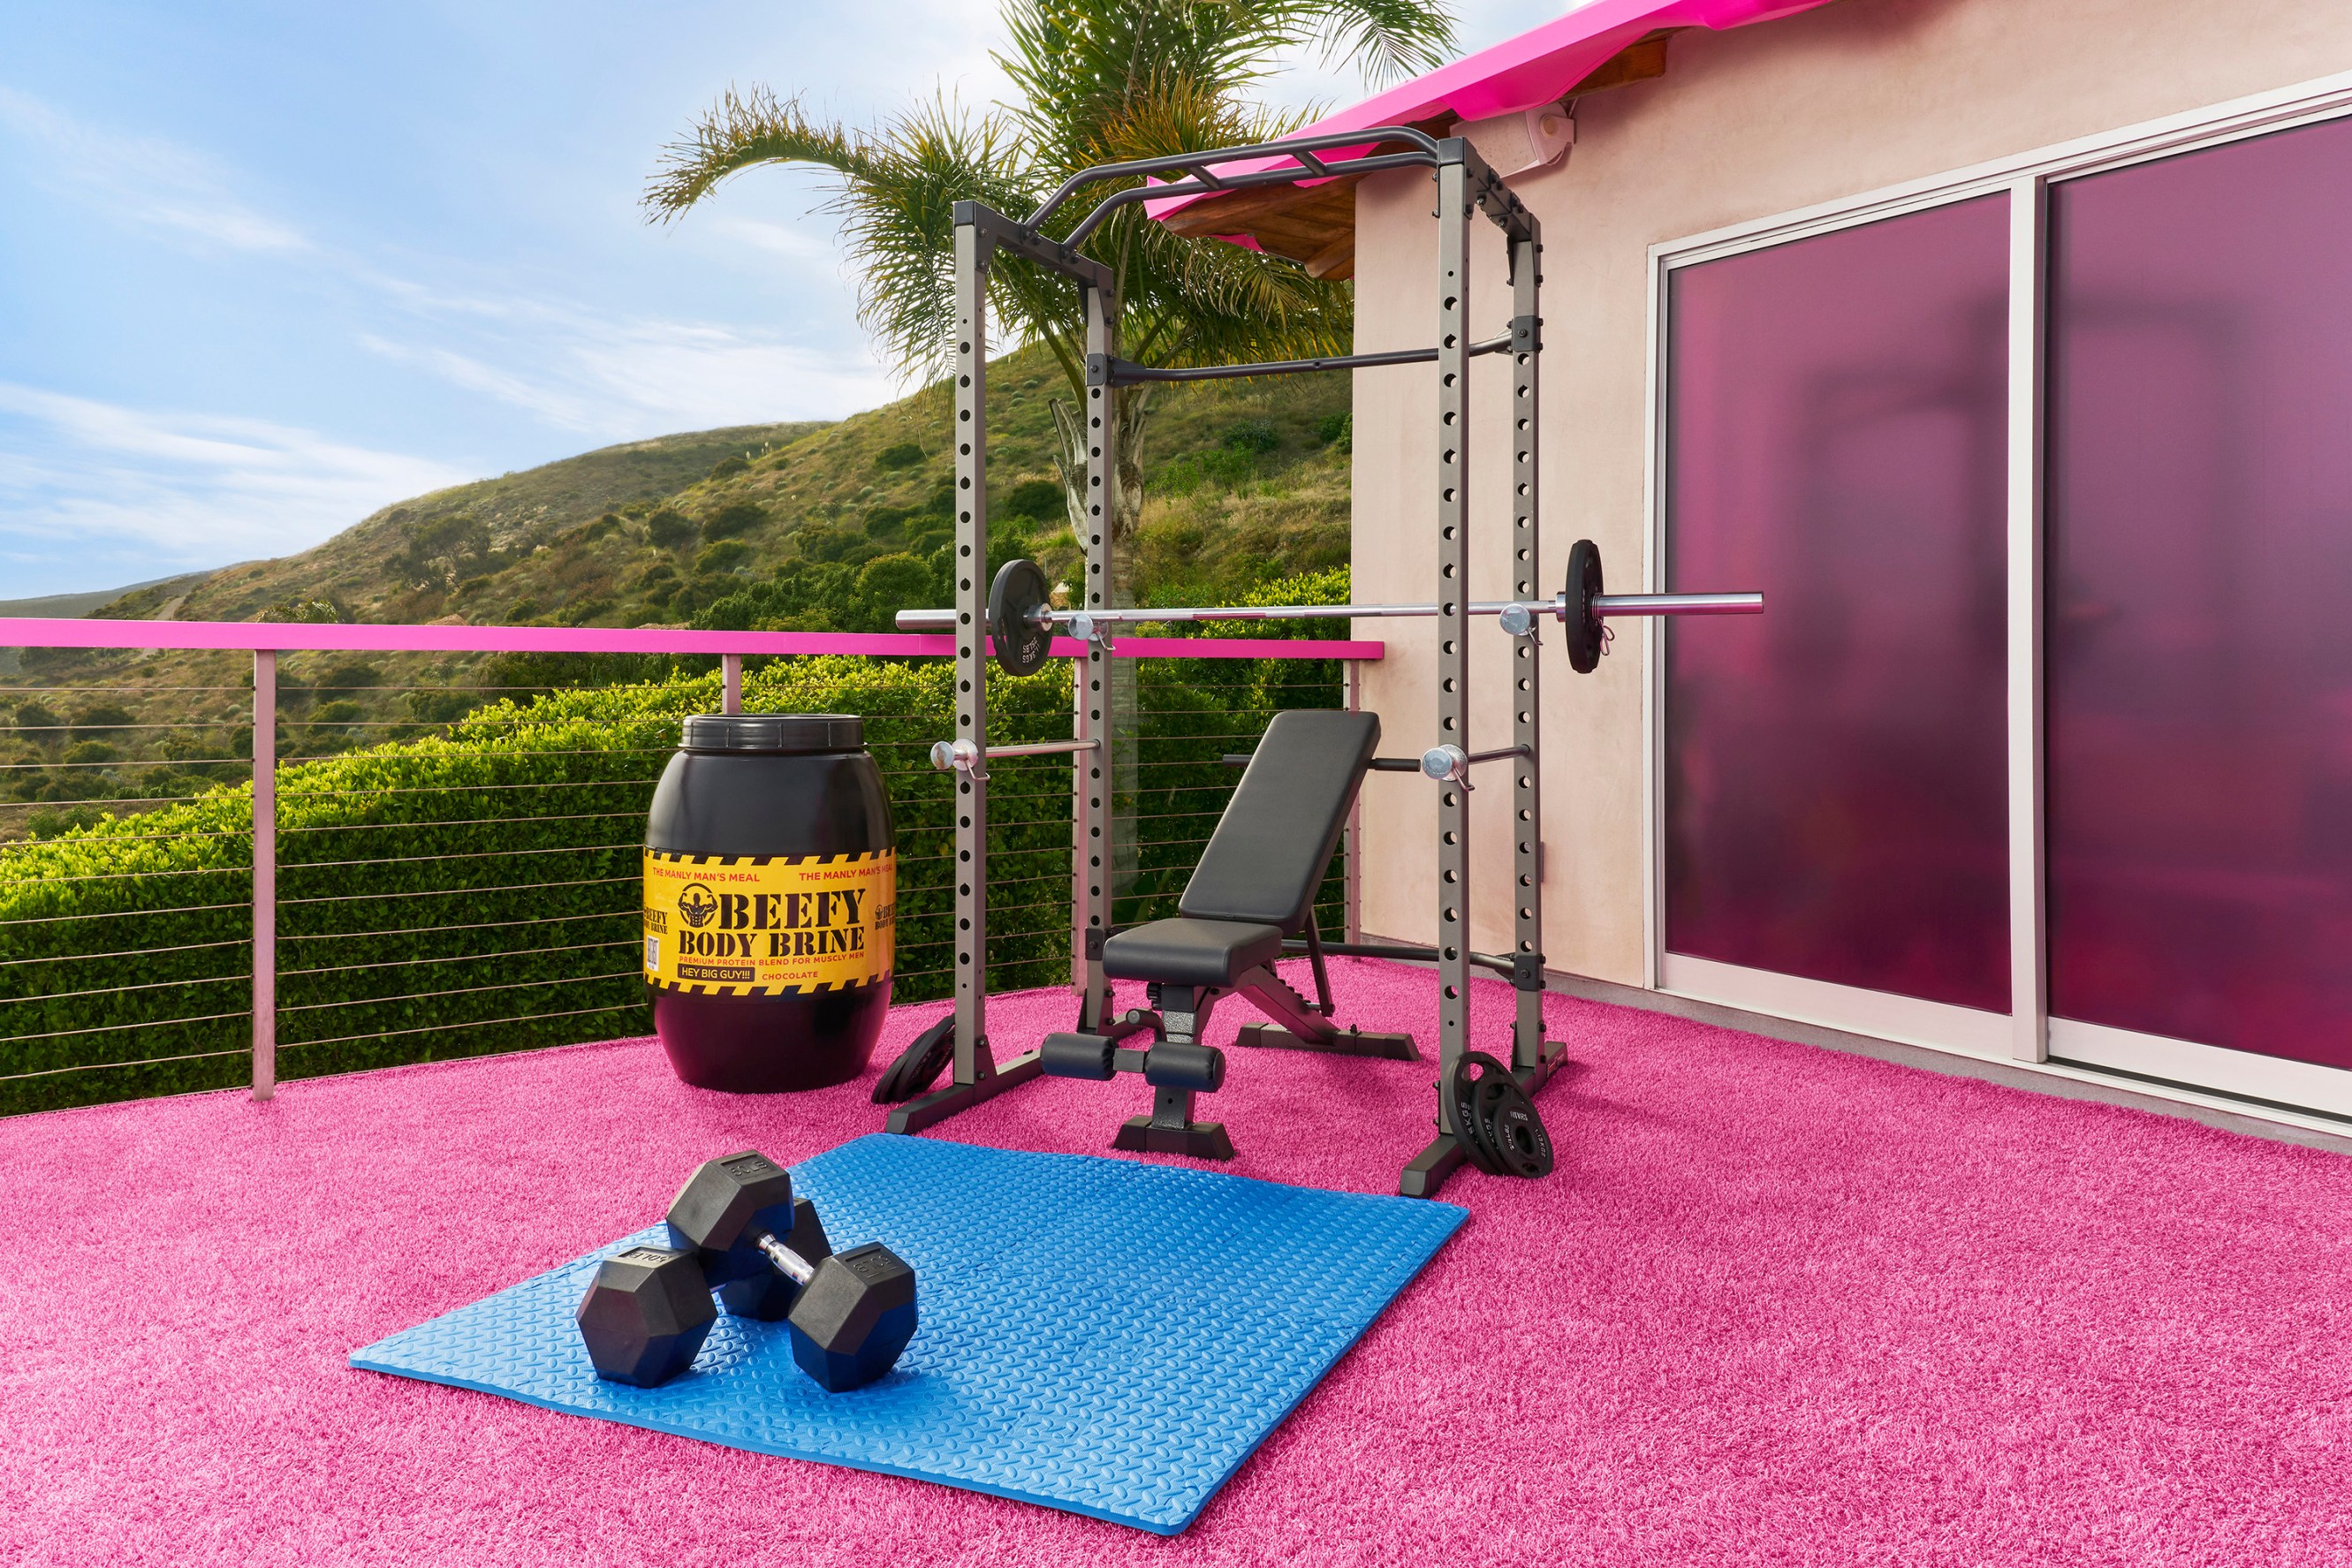 Outdoor gym area on a balcony, pink fluffy rug underneath the equipment and sliding glass doors behind it.